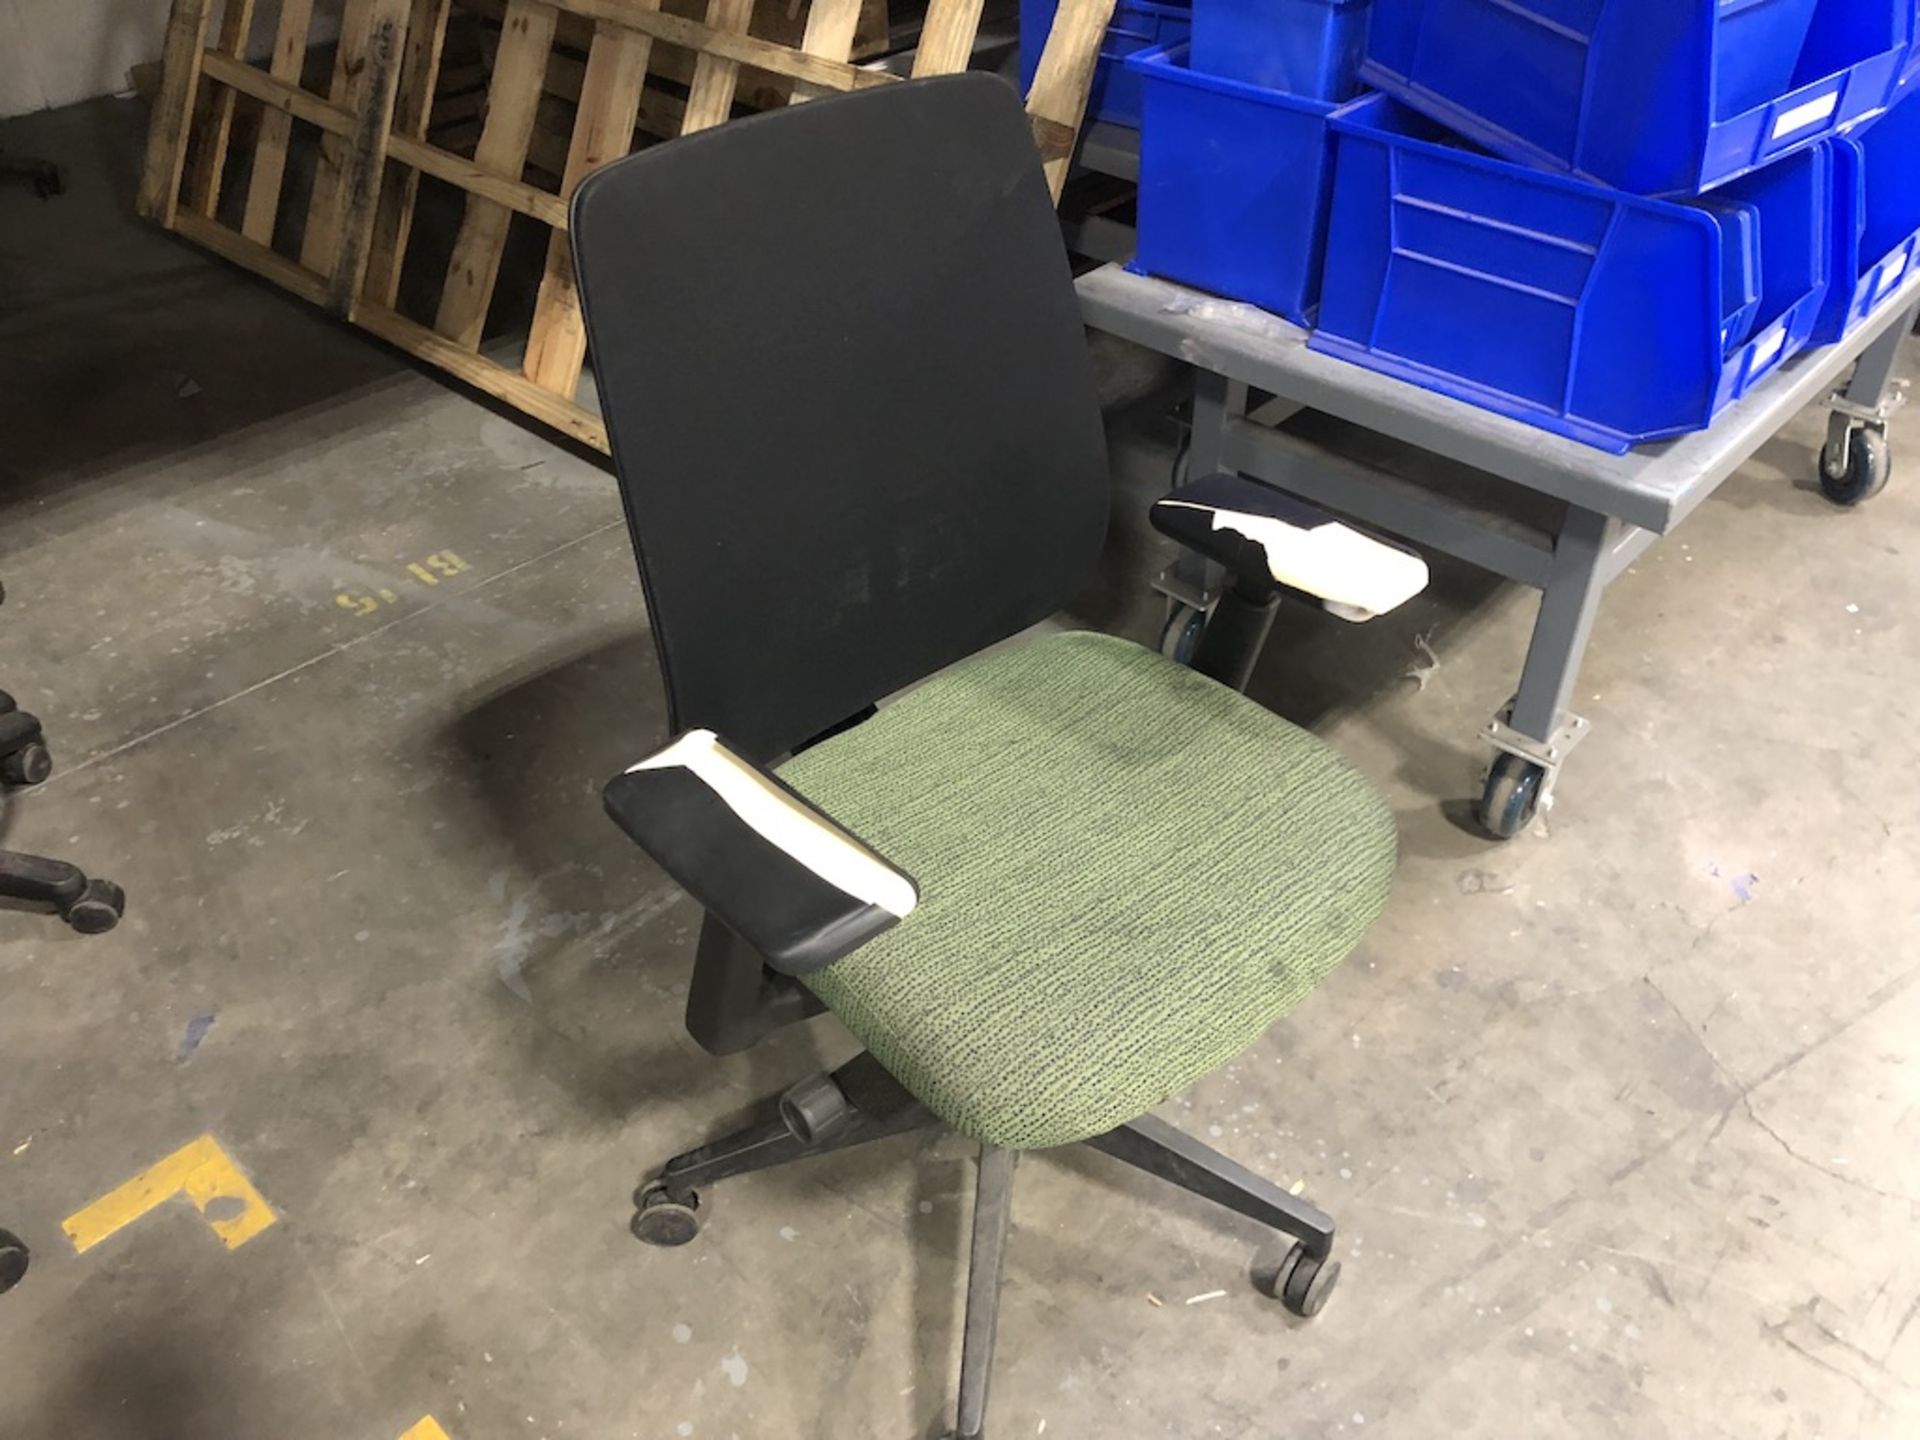 5 CASTER OFFICE CHAIR GREEN SEAT CUSHION, PADDED ARM REST ( SPLIT ), BLACK MESH BACK SUPPORT - Image 2 of 3